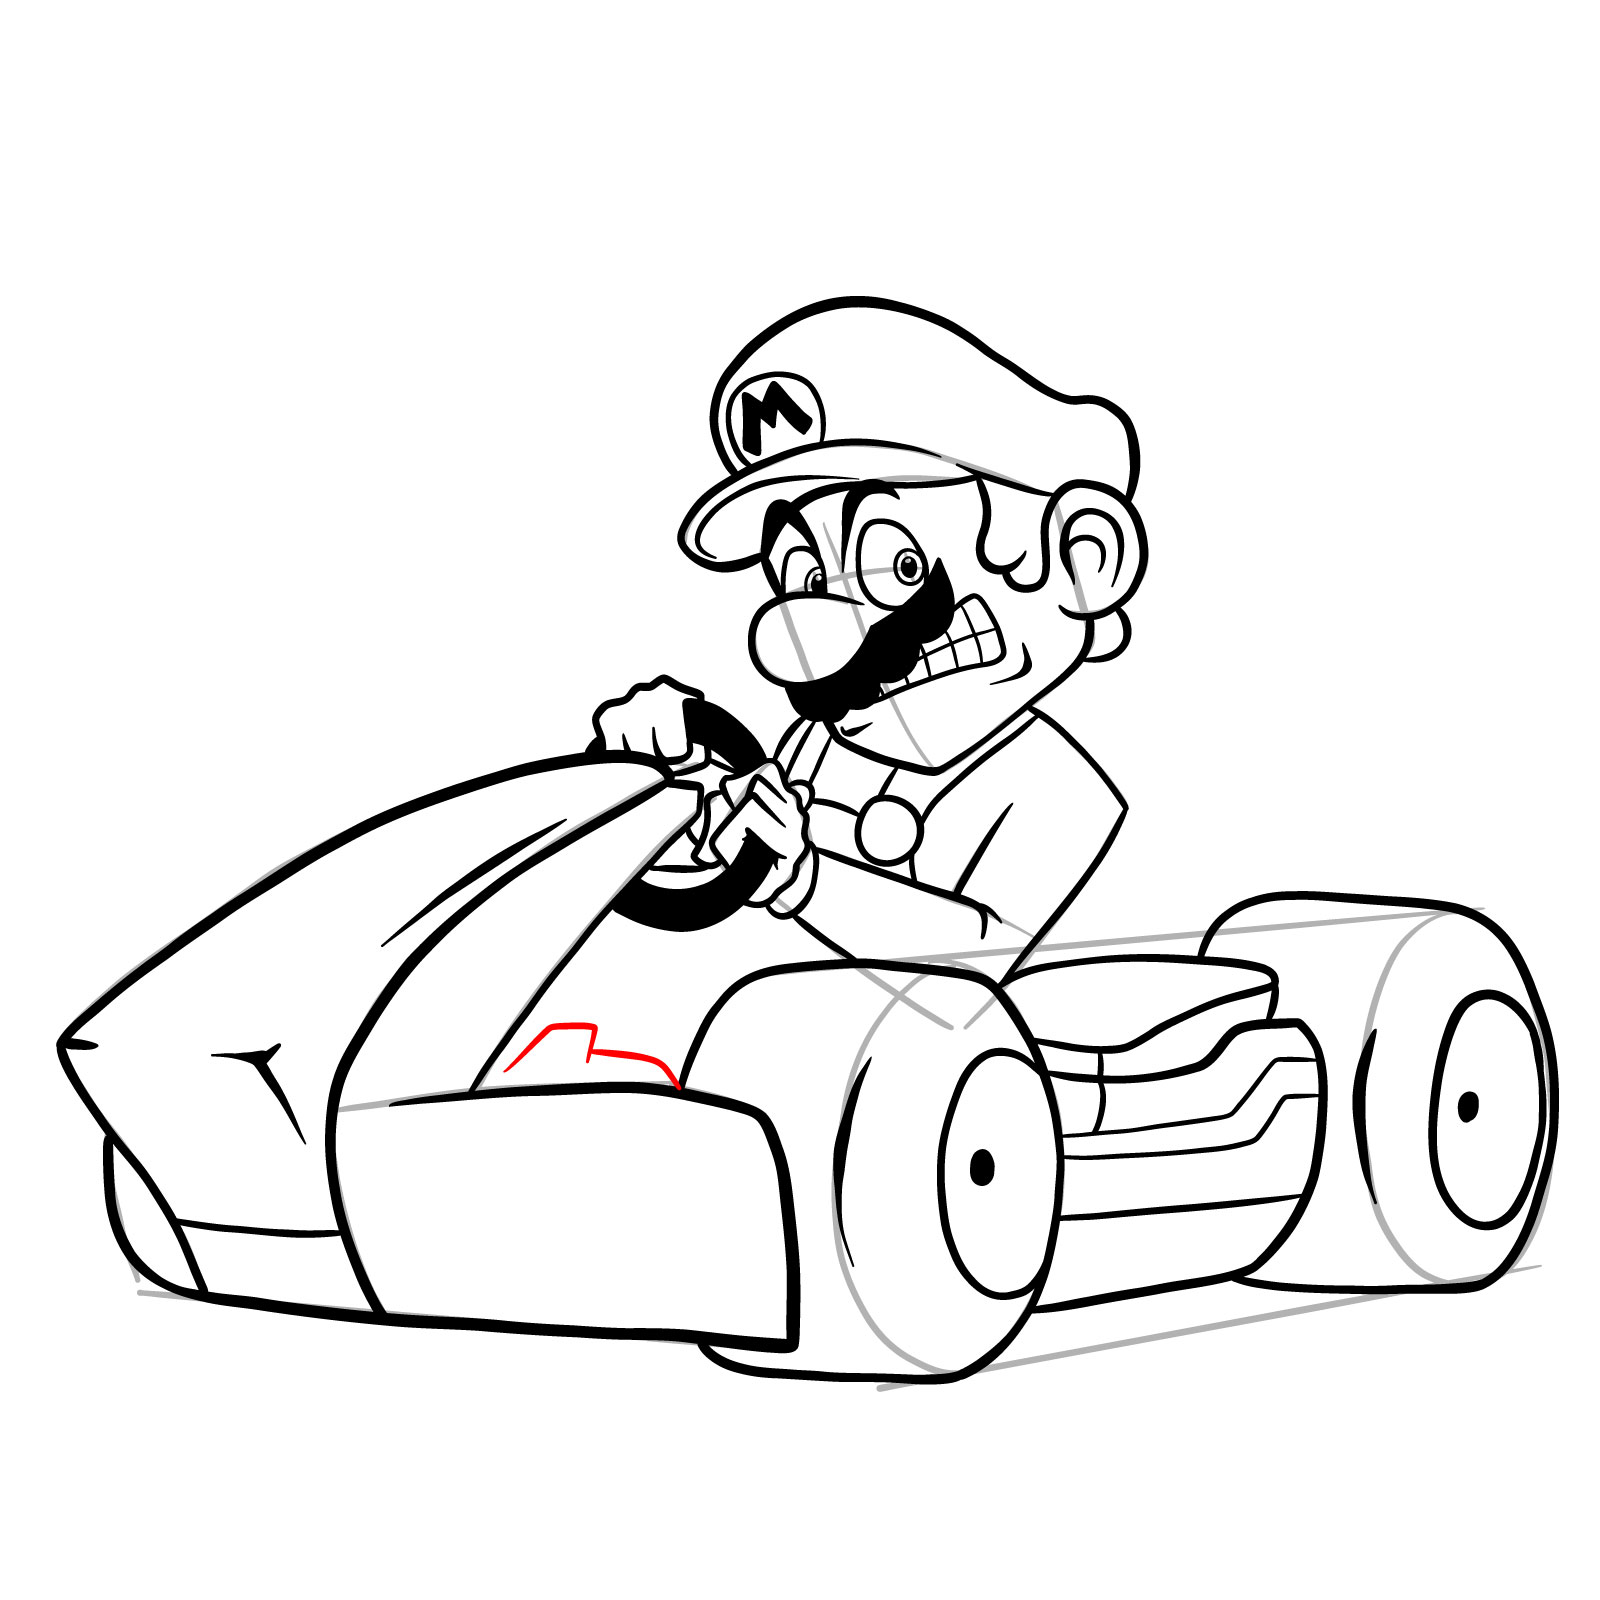 How to draw Race Traitors Mario - step 37